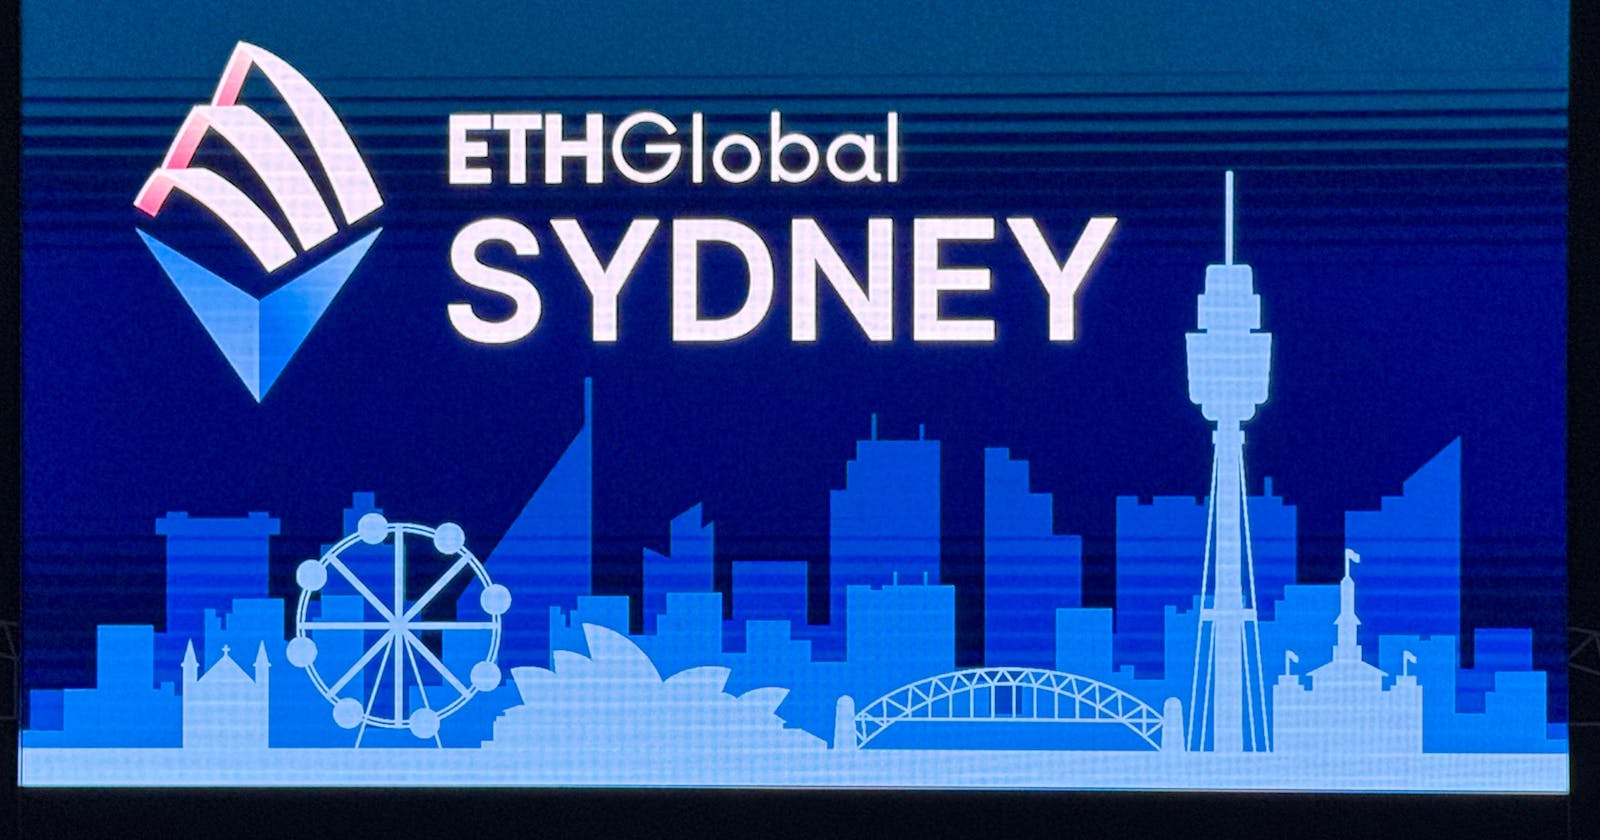 Top Highlights from the Sydney ETHGlobal Hackathon